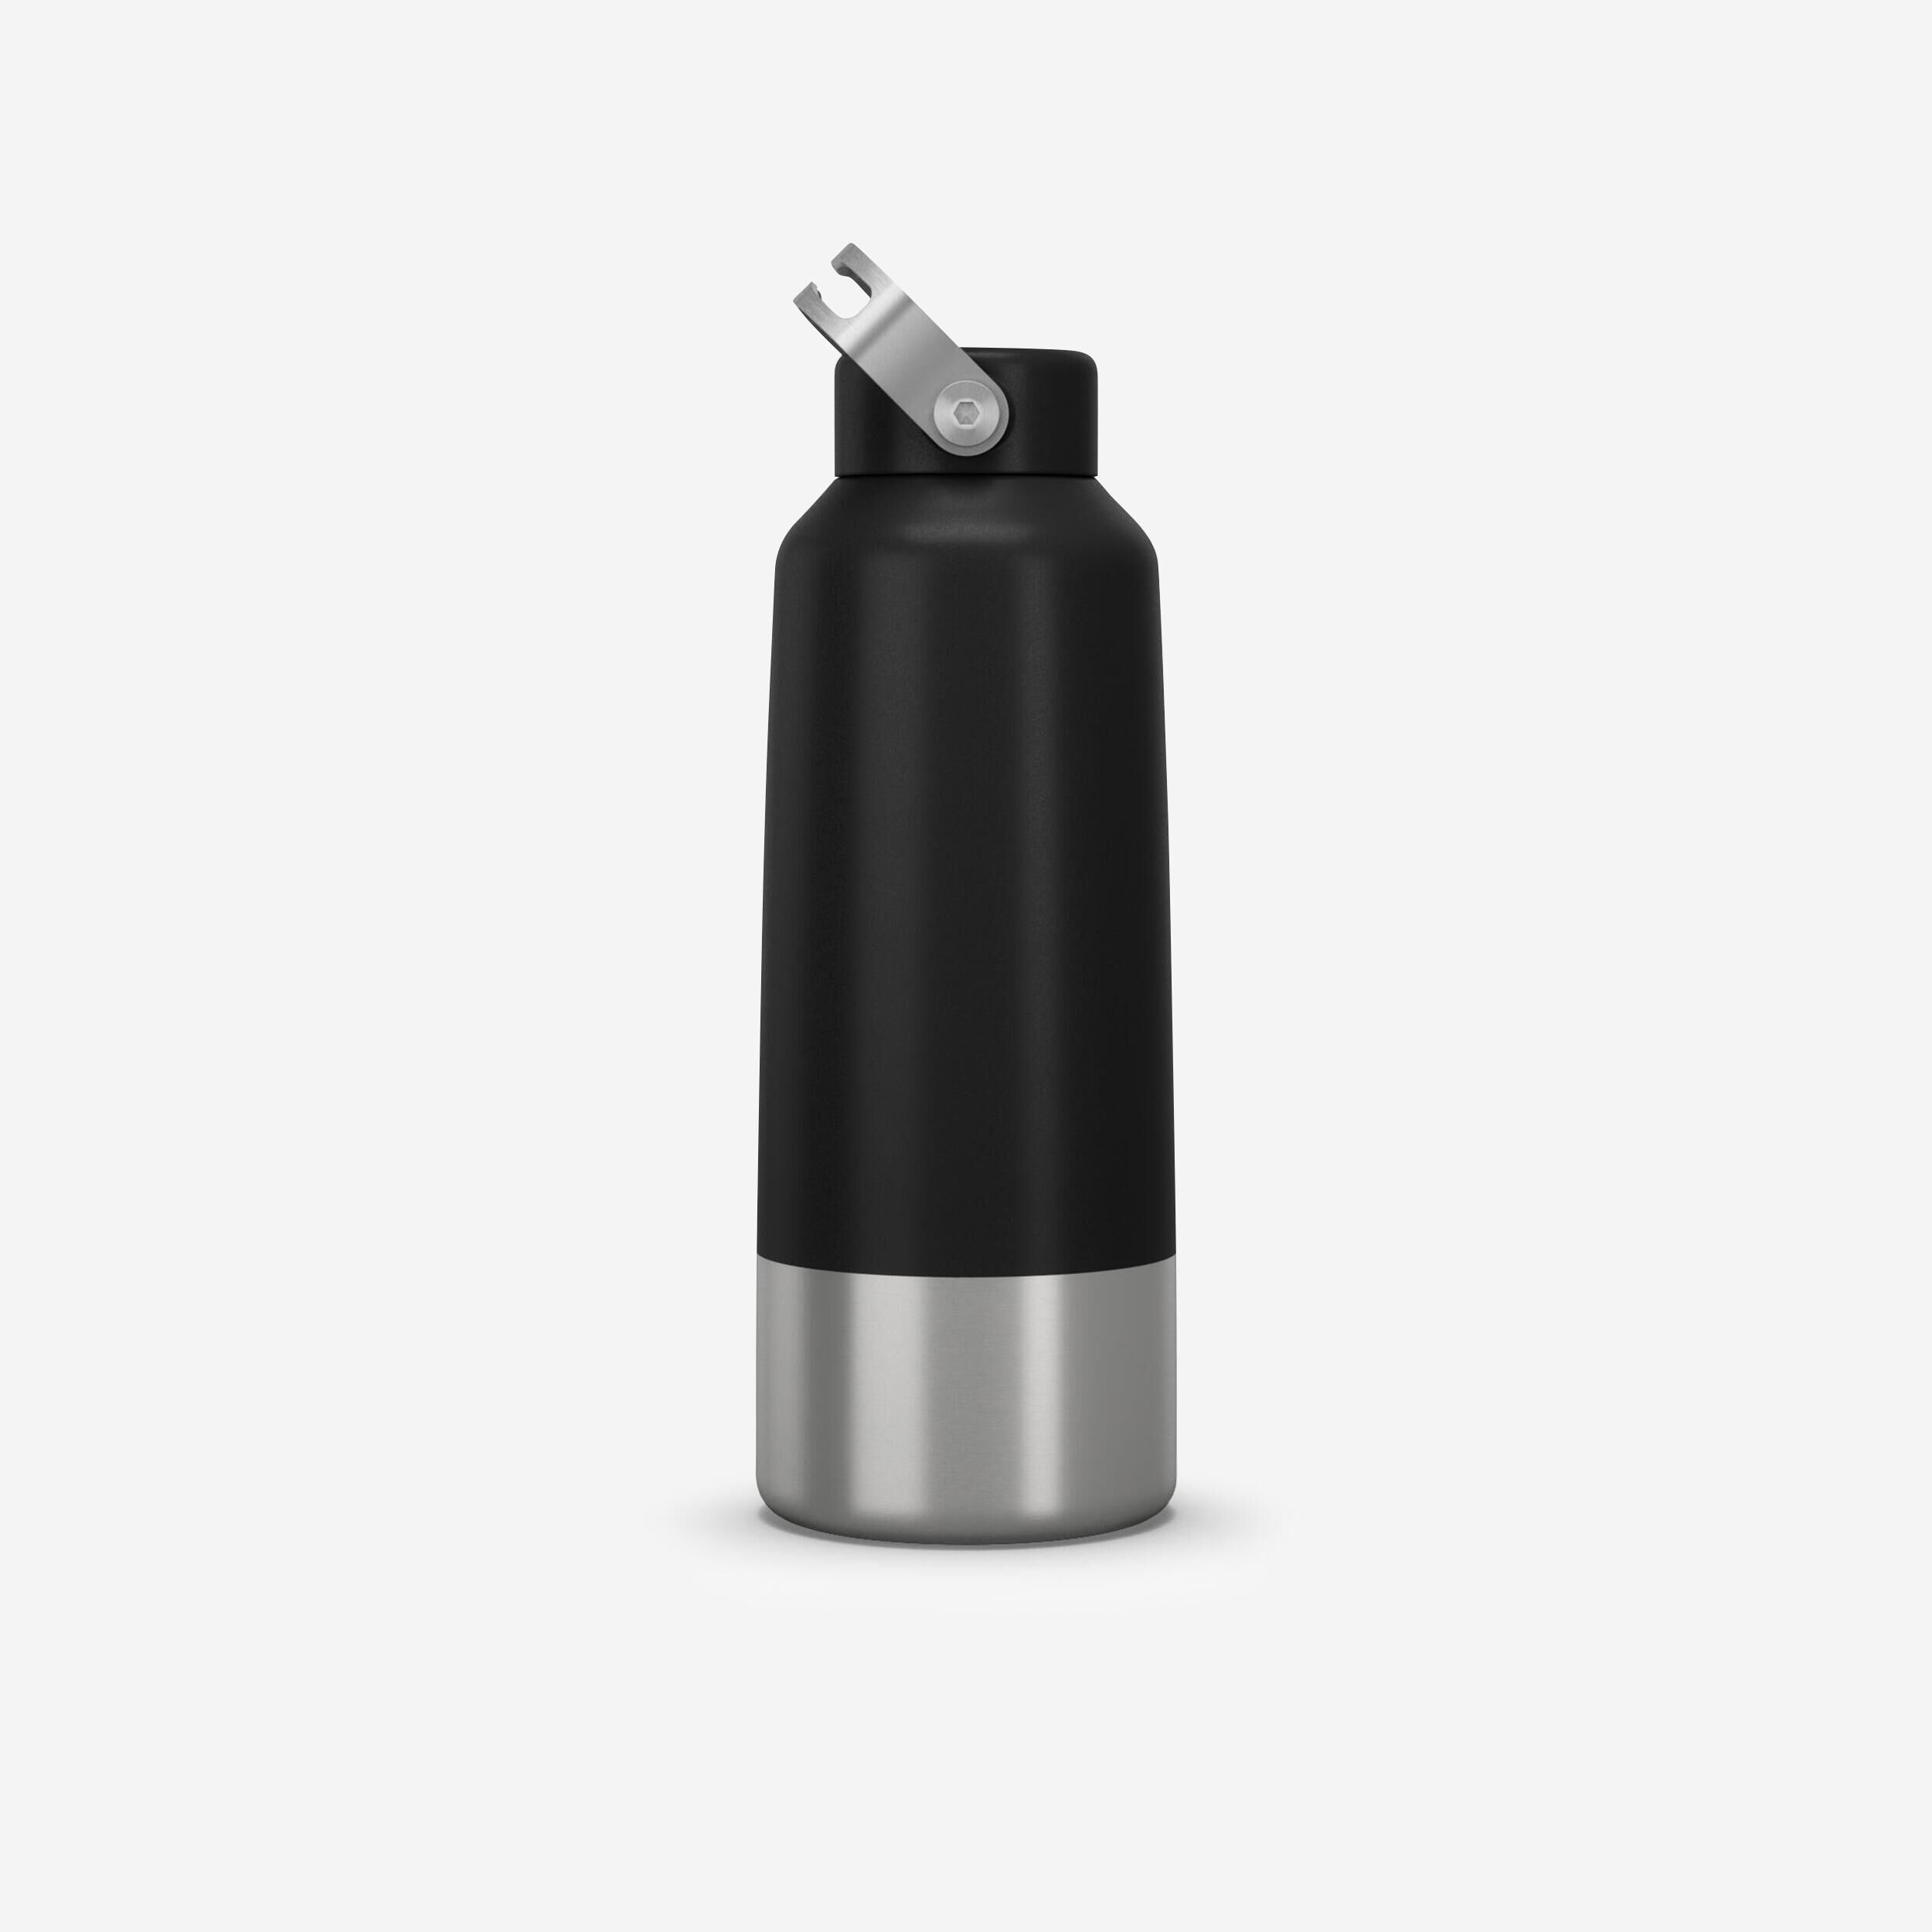 QUECHUA 1 L stainless steel flask with screw cap for hiking - black